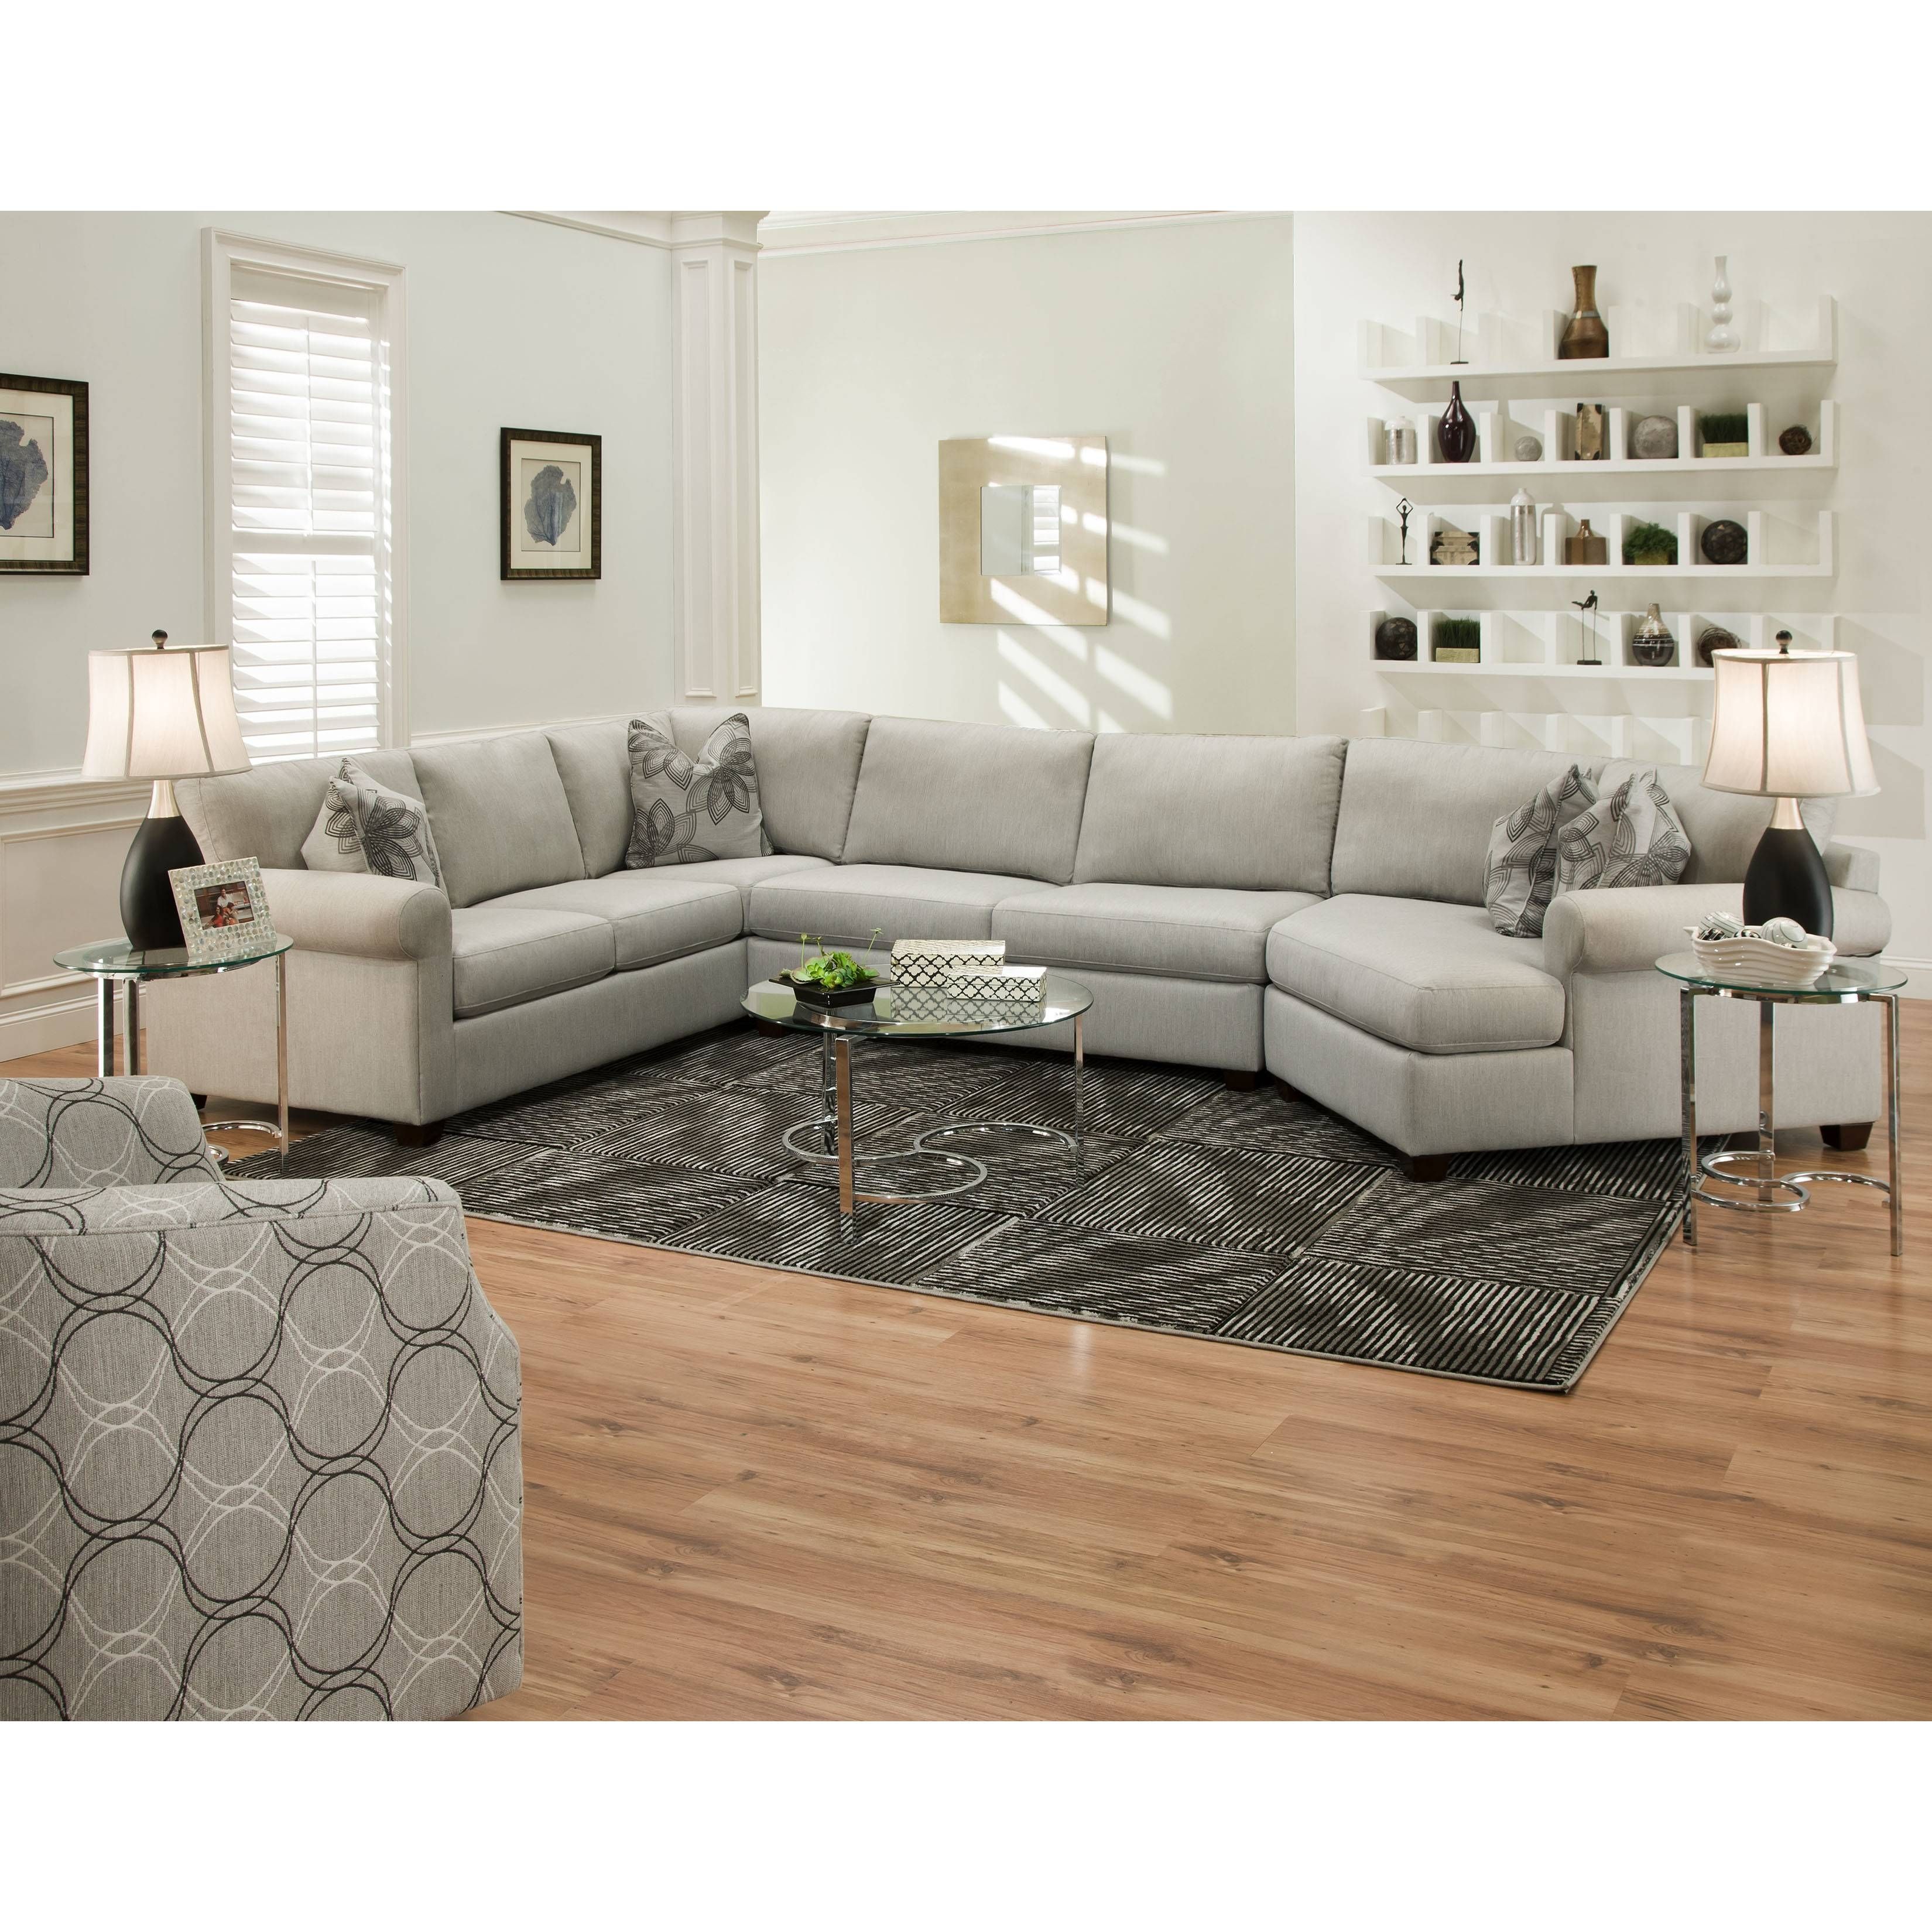 The Most Popular Bauhaus Sectional Sofa 76 For Your American Made For American Made Sectional Sofas (View 15 of 30)